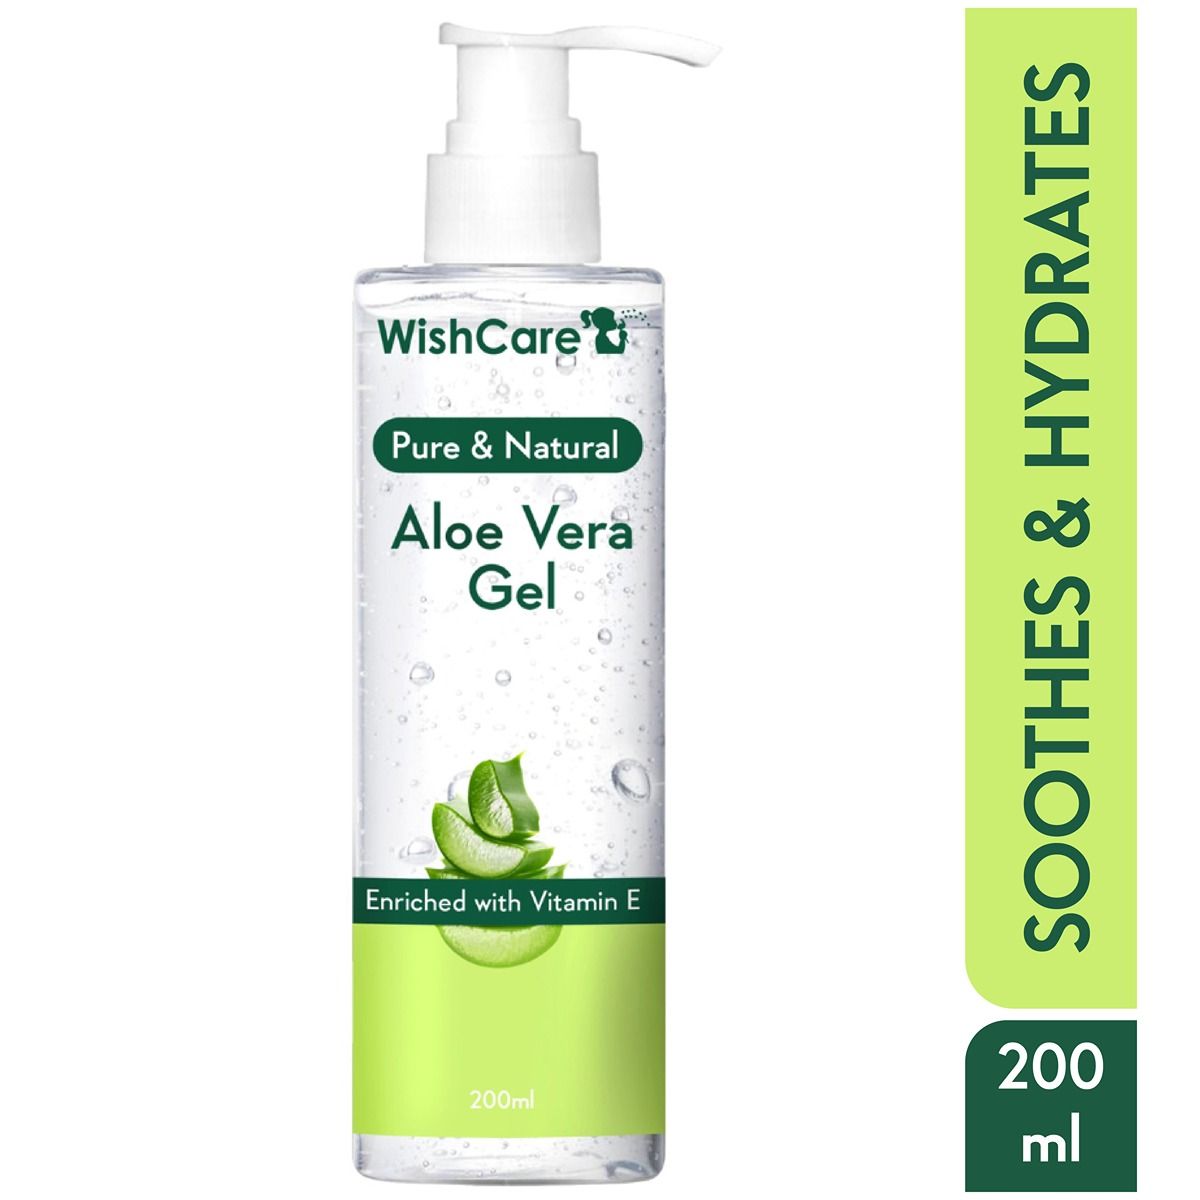 Buy WishCare Pure & Natural Aloe Vera Gel - 200 Ml - Enriched With Vitamin E - Multipurpose Gel for Skin and Hair - Purplle